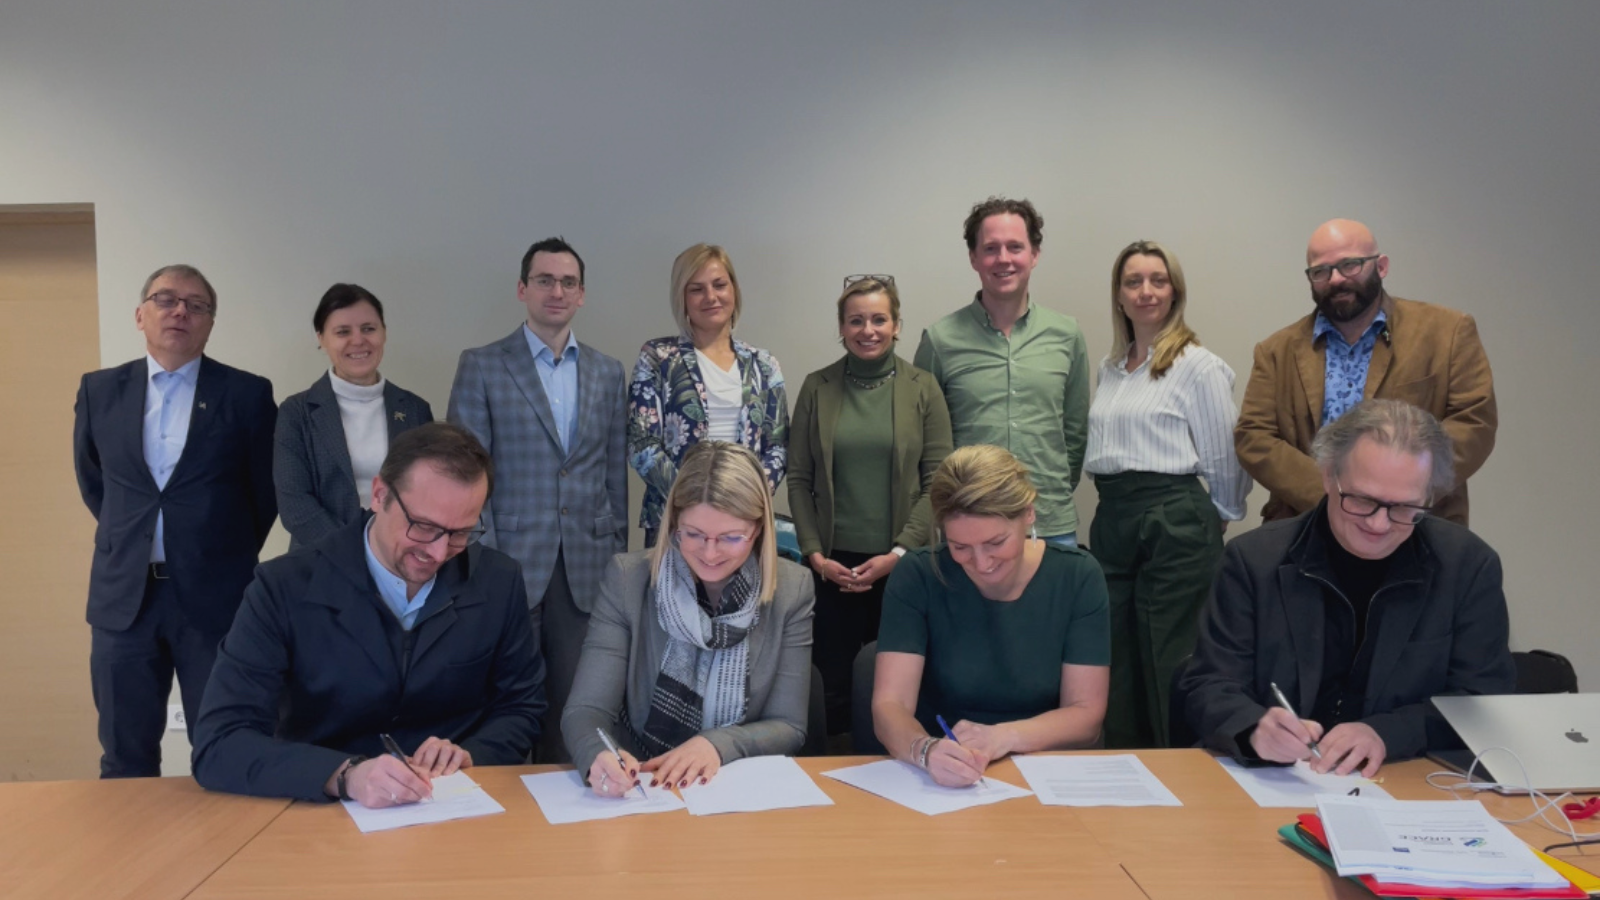 Vidzeme University of Applied Sciences signs a tripartite agreement with Austrian and Dutch colleagues on the development of a joint master's study program